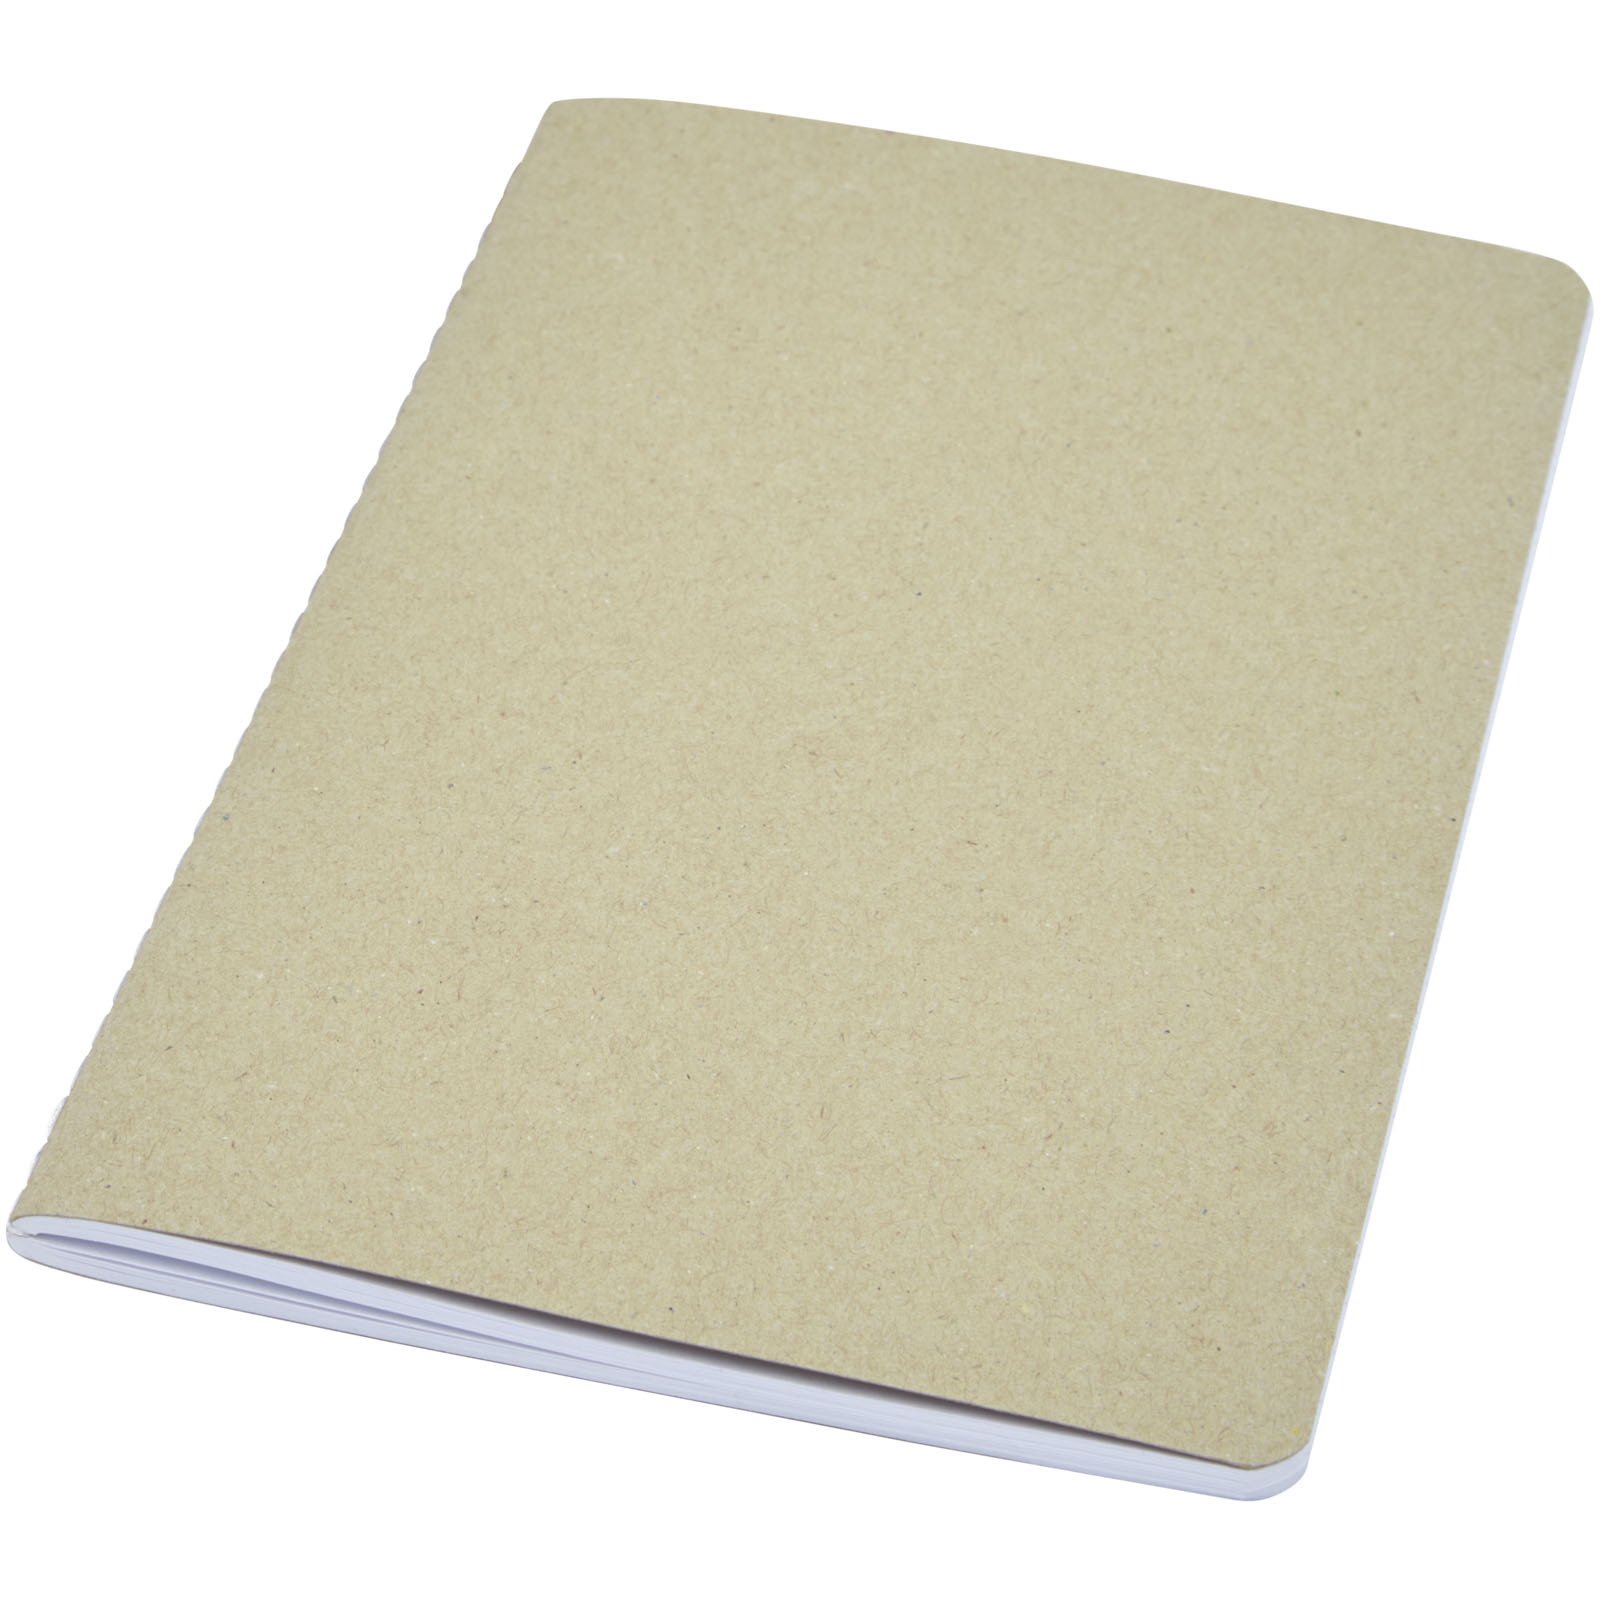 Paper Products - Gianna recycled cardboard notebook